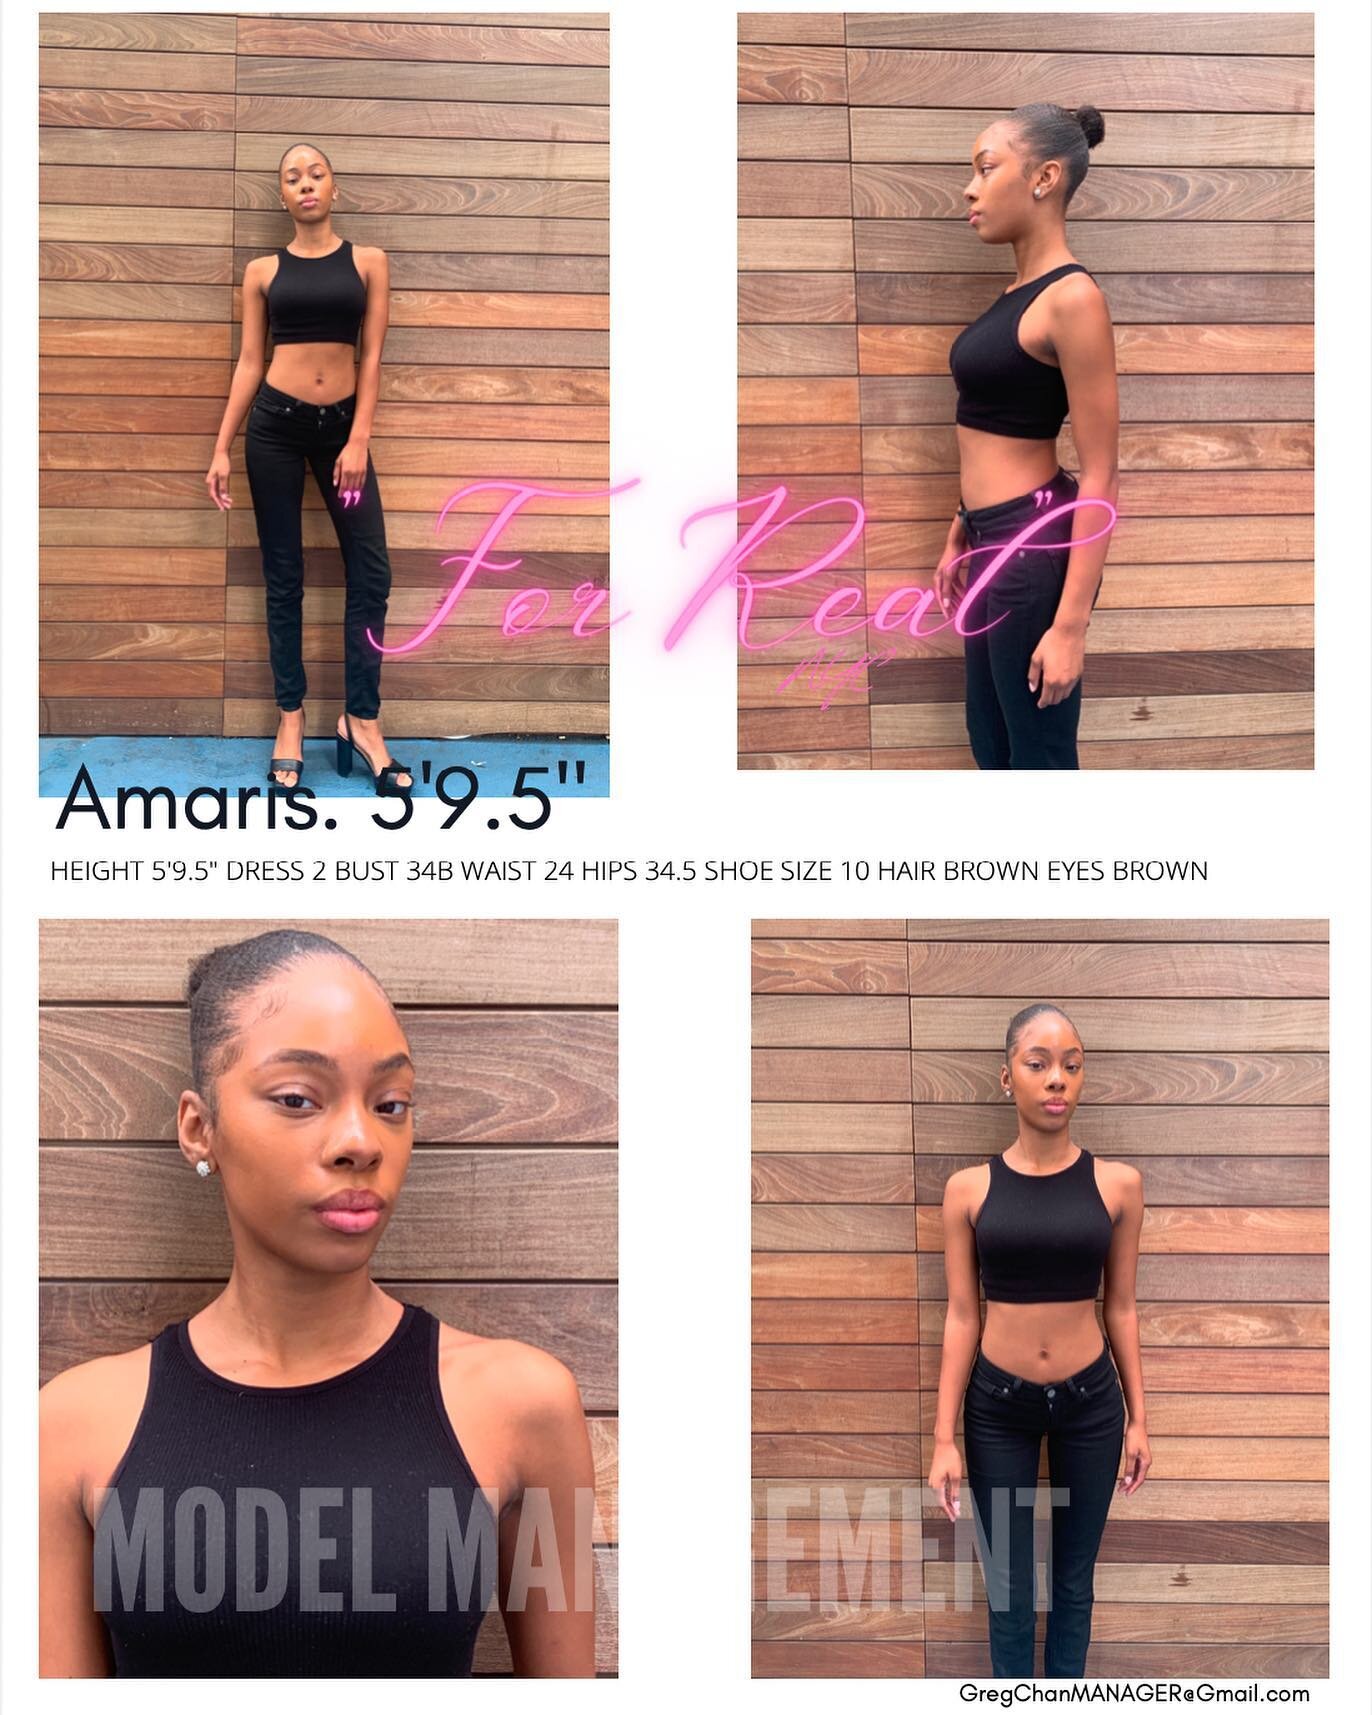 Amaris digis. For real
www.forrealnyc.com
*

* 

*

*

*

* 

*
#model #models #malemodel #malemodels #fashion #modelagency #modelswanted #beautiful #runway #photoshoot #modeling #photographer #scoutme #modelscout #getscouted #teens #getscouted #mode